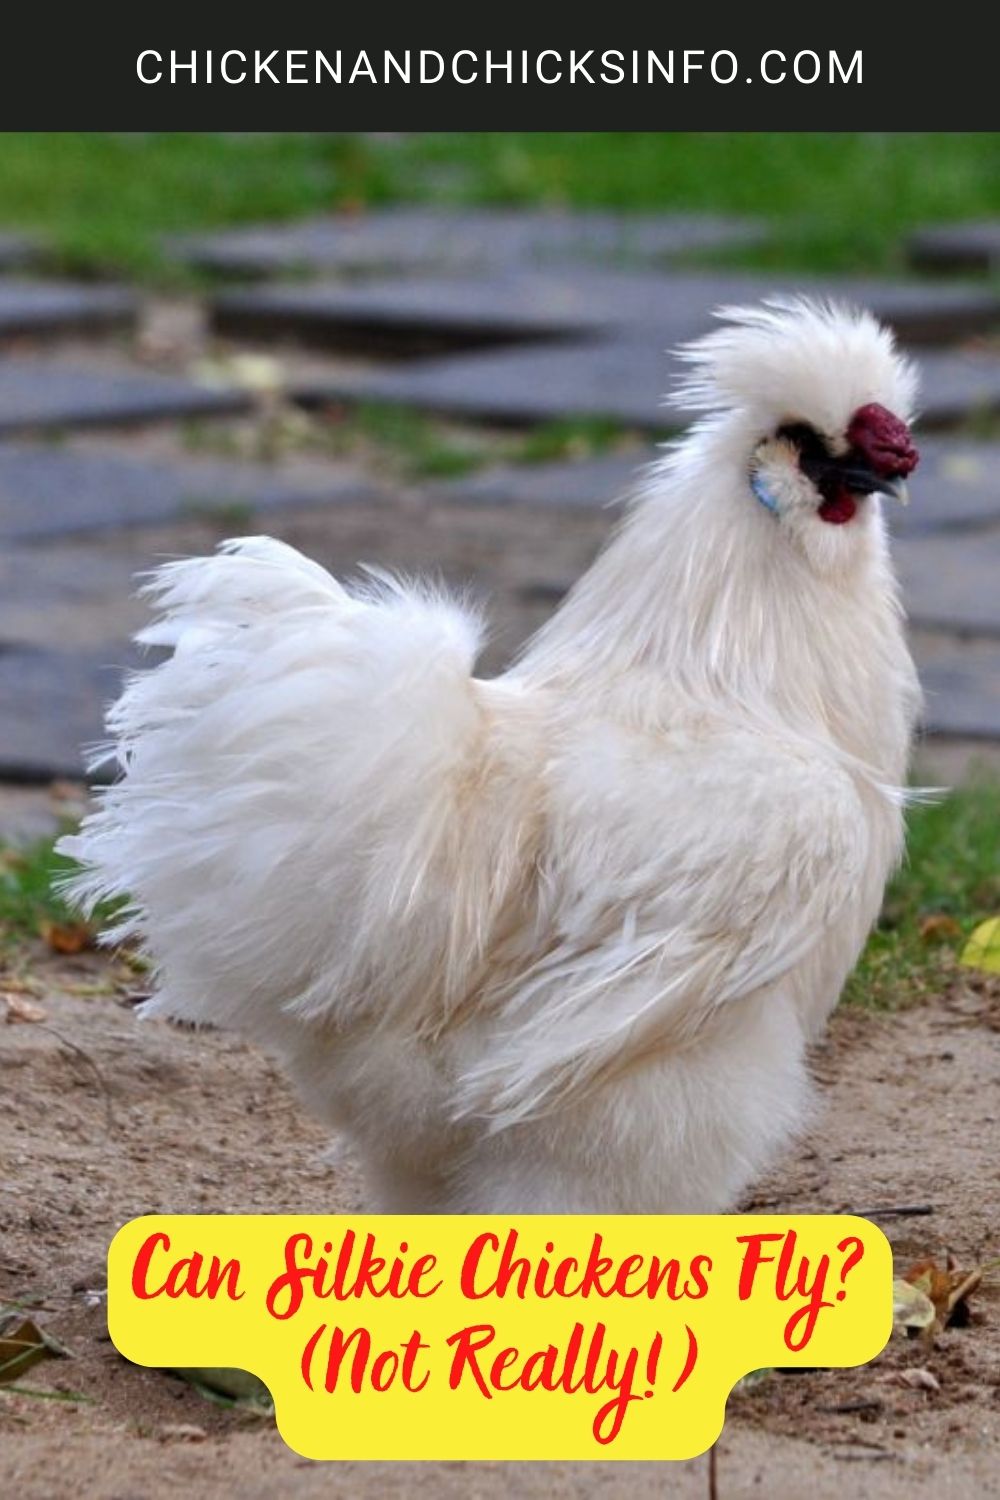 Can Silkie Chickens Fly? (Not Really!) poster.